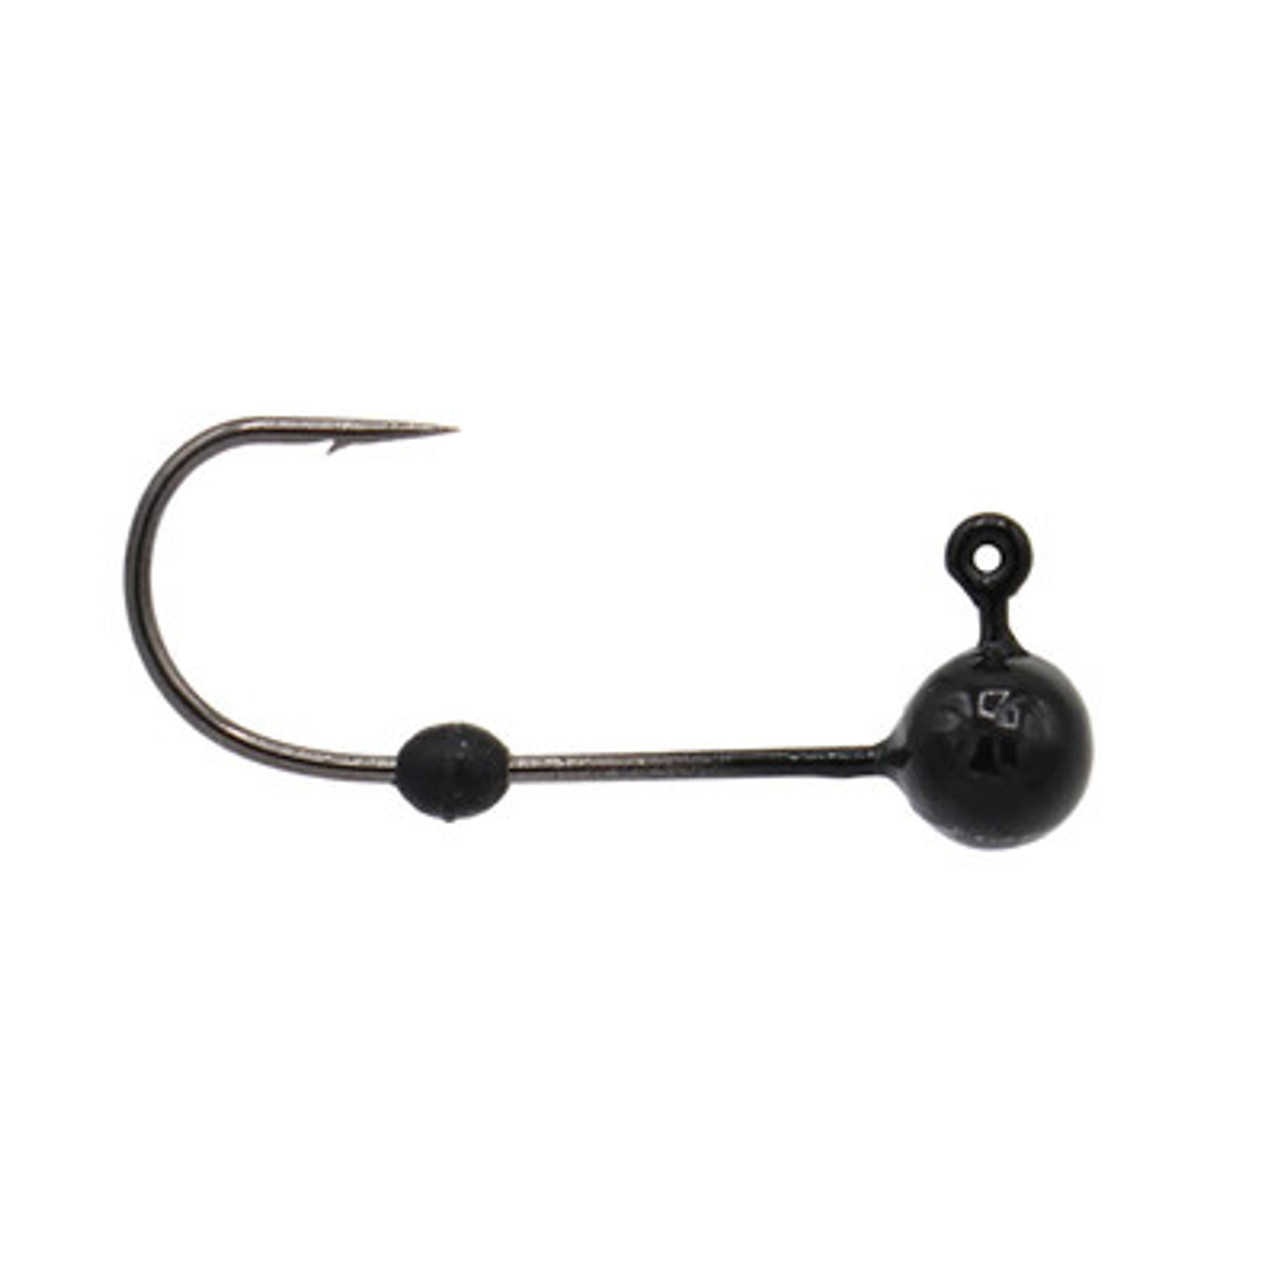 Fitzgerald Fishing Thrift Tungsten Micro Finesse Skirted Jig